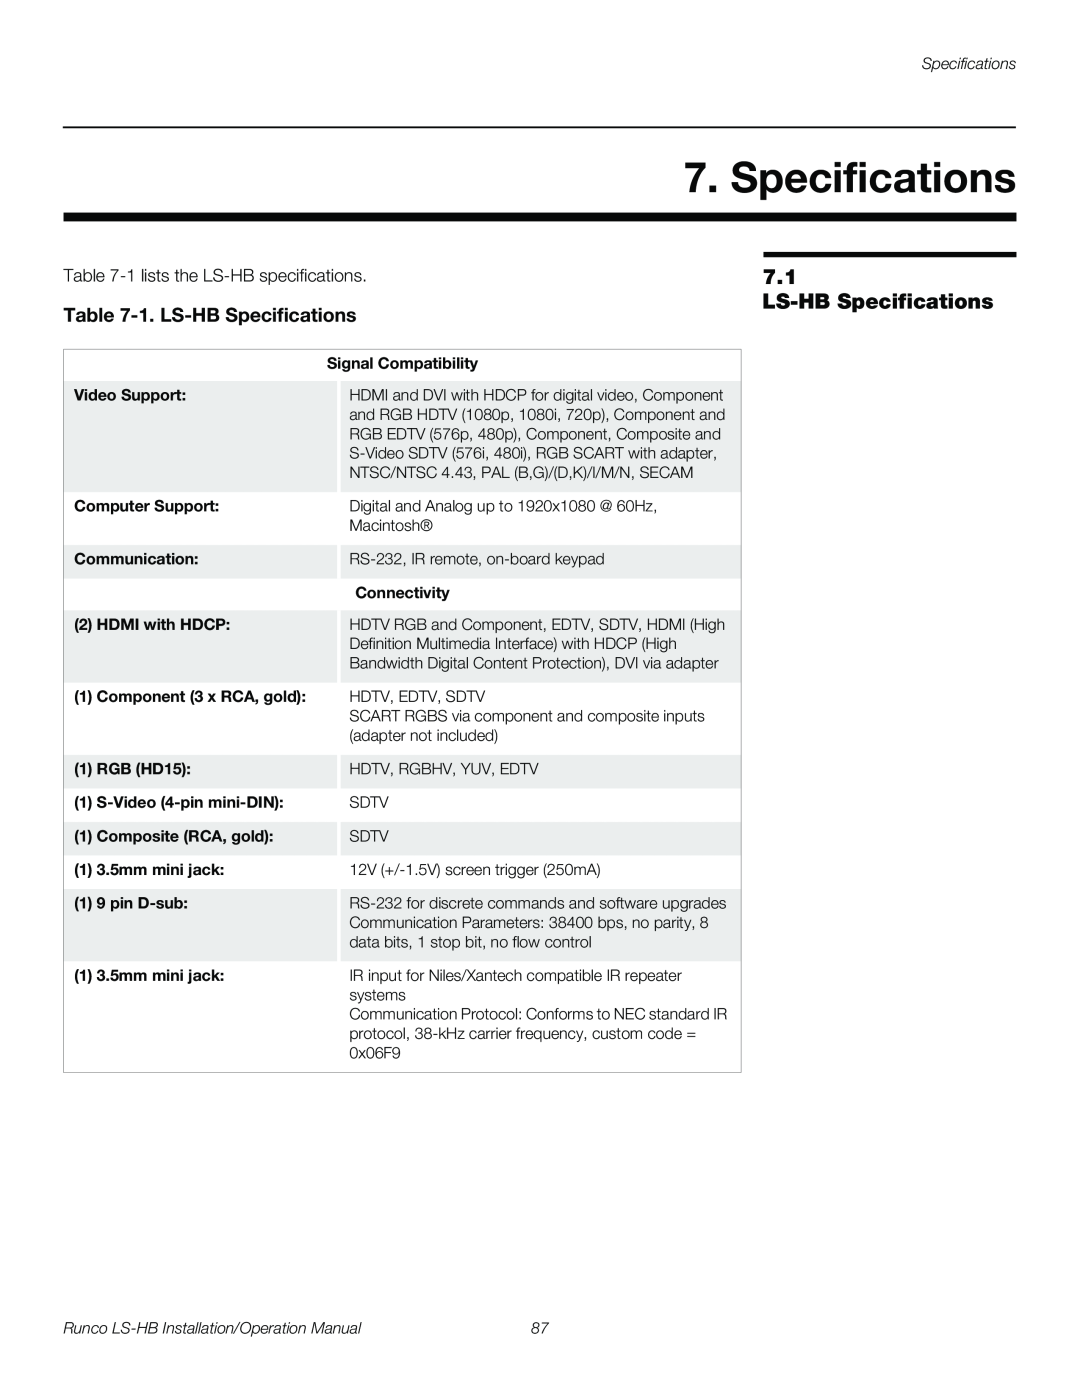 Runco operation manual 1. LS-HB Specifications 